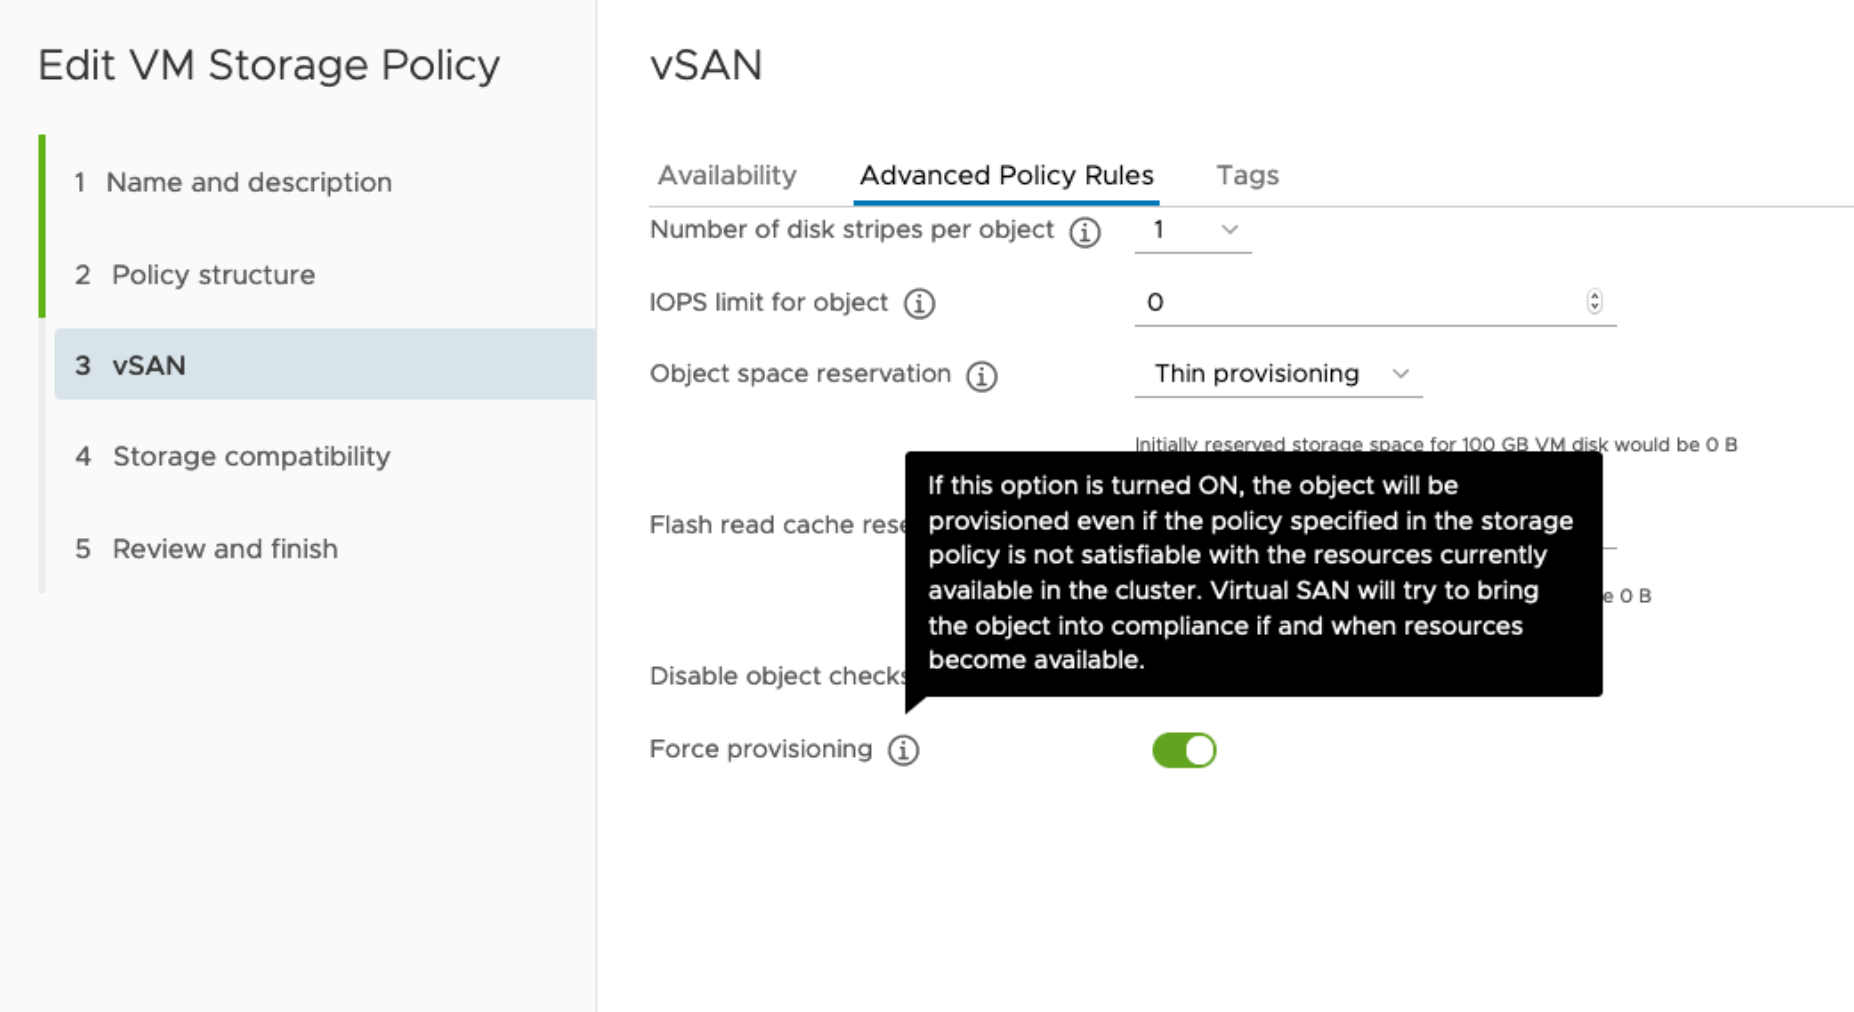 The screenshot shows the Force provisioning option on the Advanced Policy Rules tab.